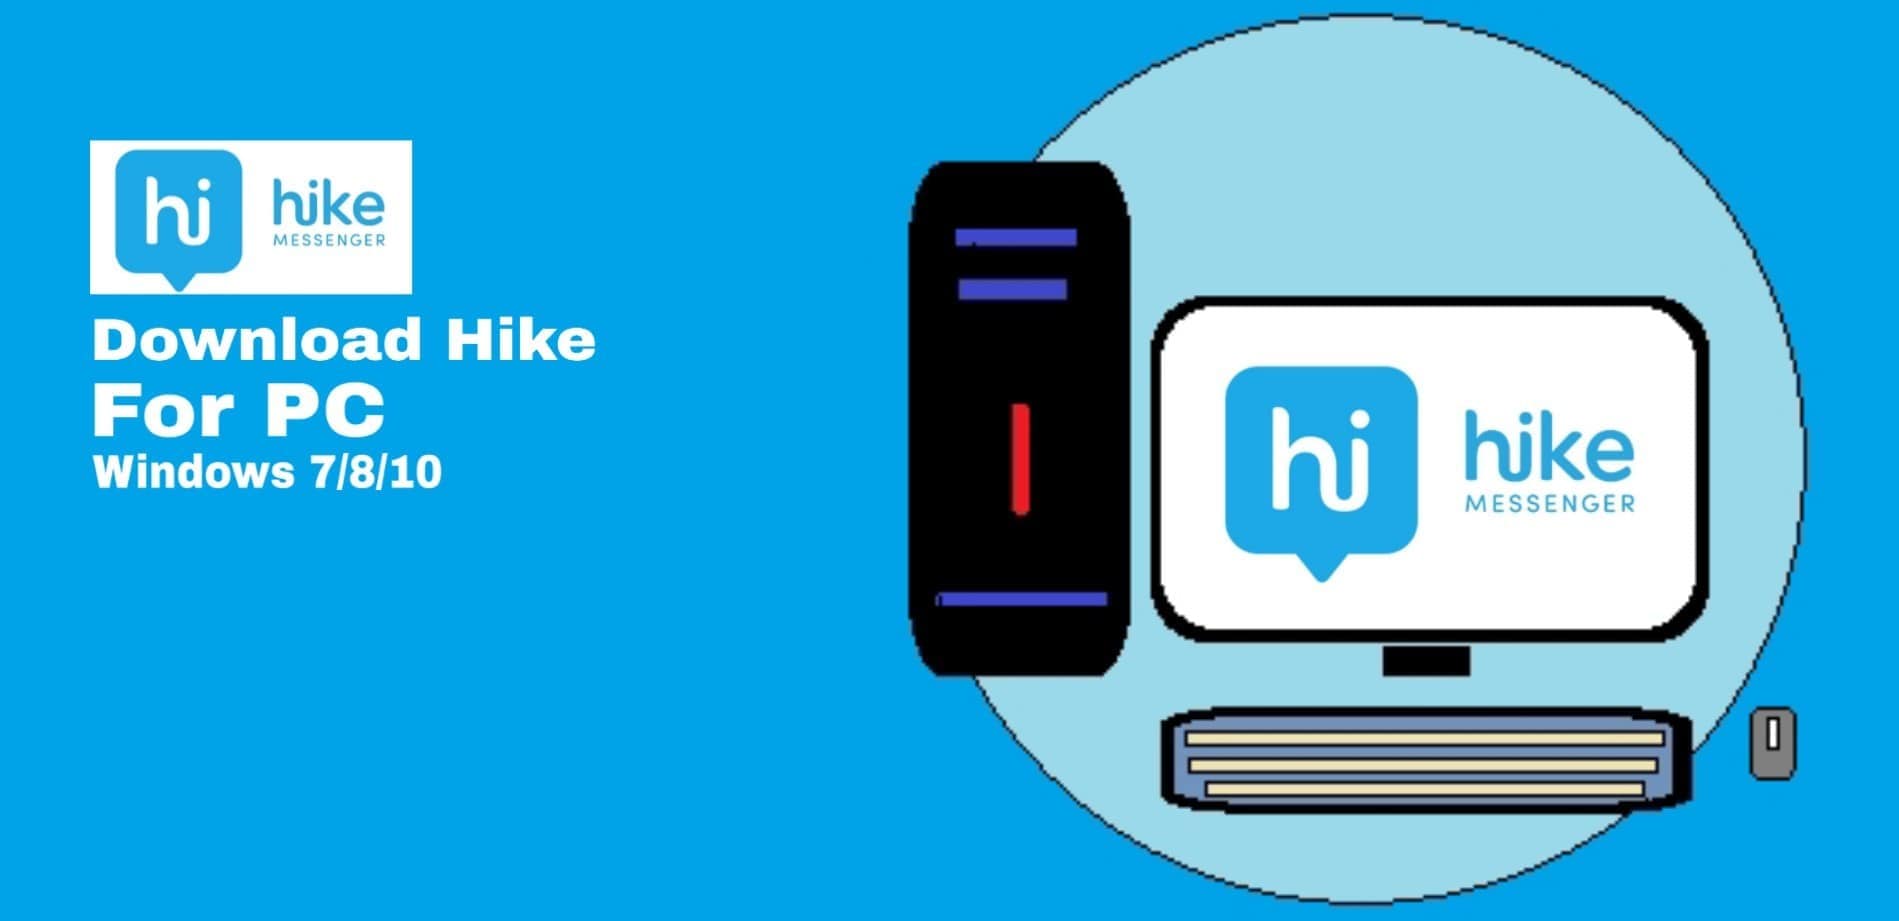 Download hike for PC